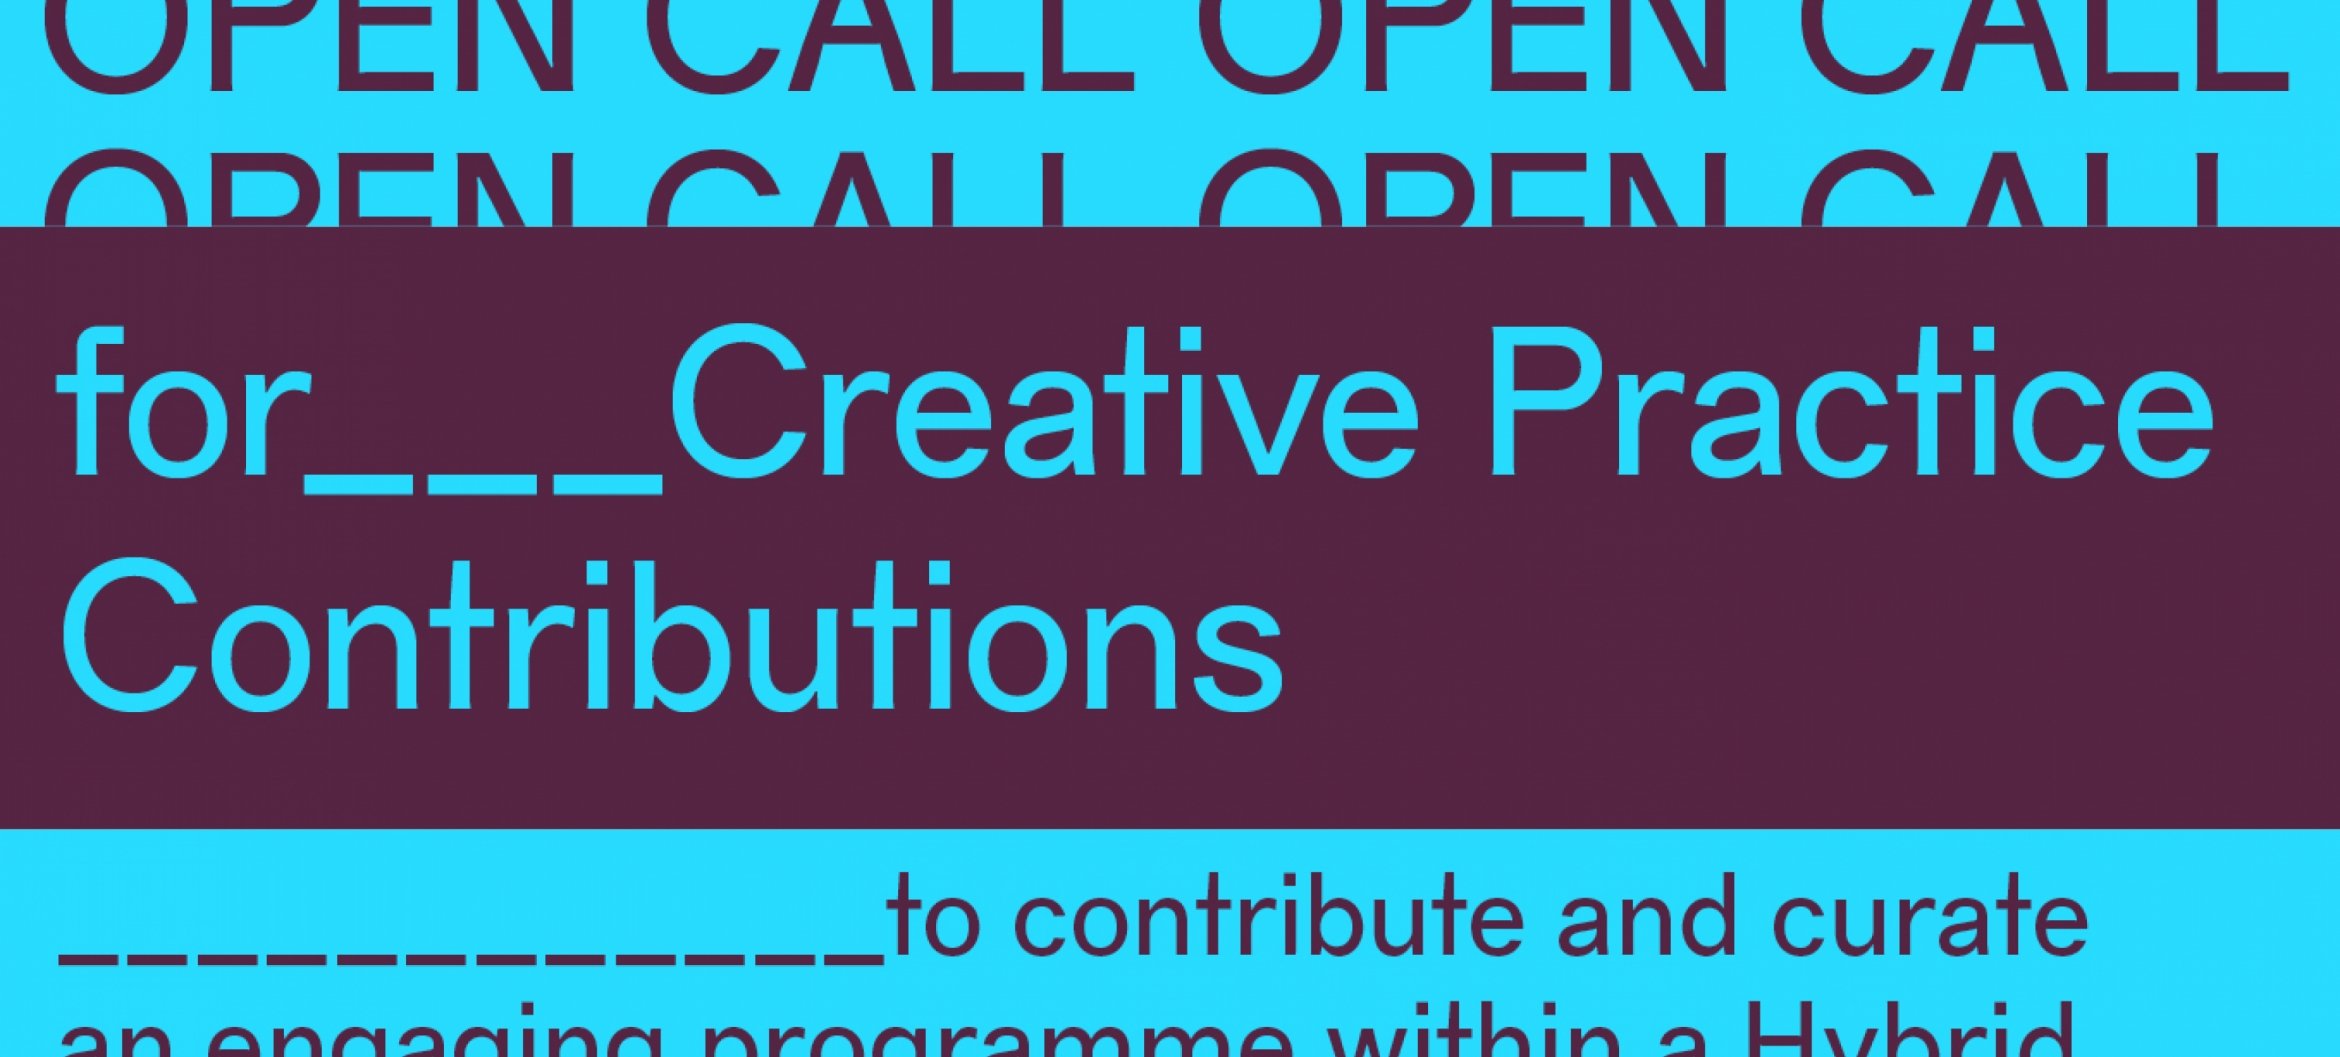 OPEN CALL for creative practices at the Internationale Fashion Conferentie &#039;Ways of Caring - Practicing Solidarity&#039;